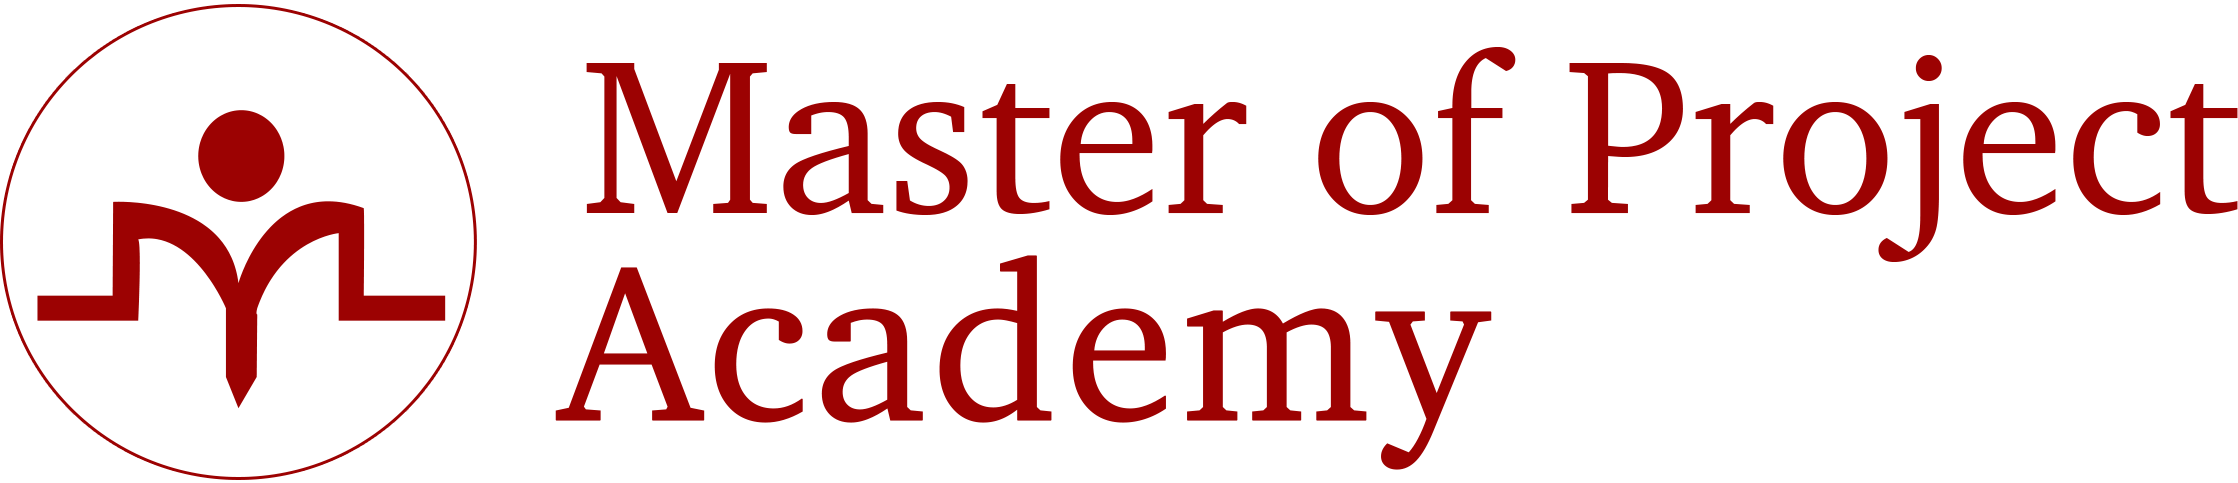 Master of Project Academy Shop